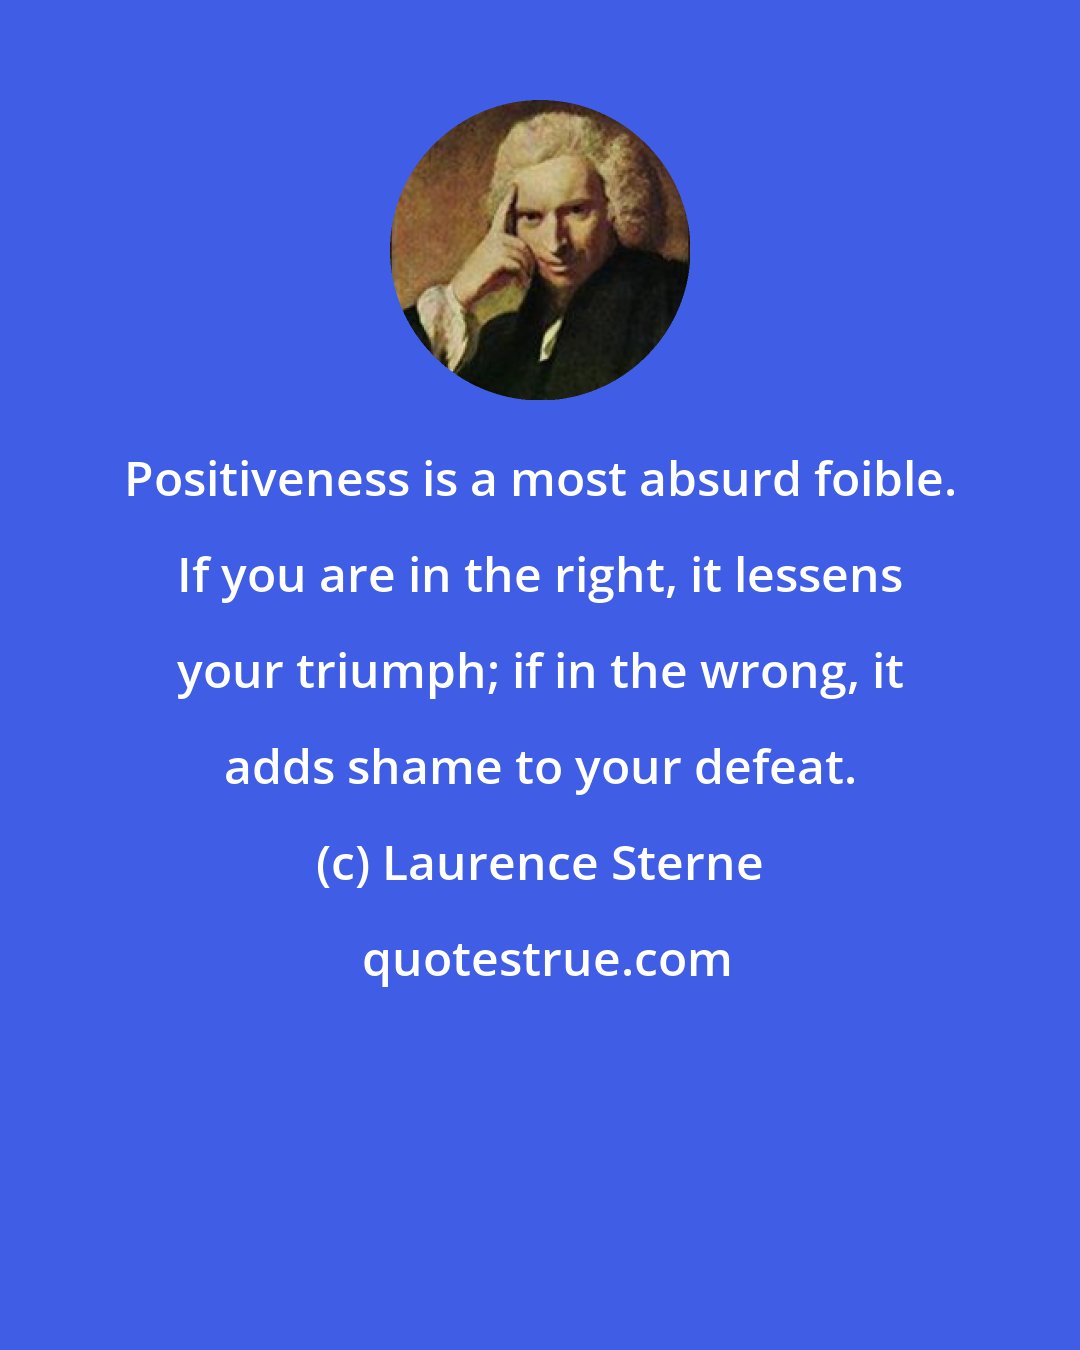 Laurence Sterne: Positiveness is a most absurd foible. If you are in the right, it lessens your triumph; if in the wrong, it adds shame to your defeat.